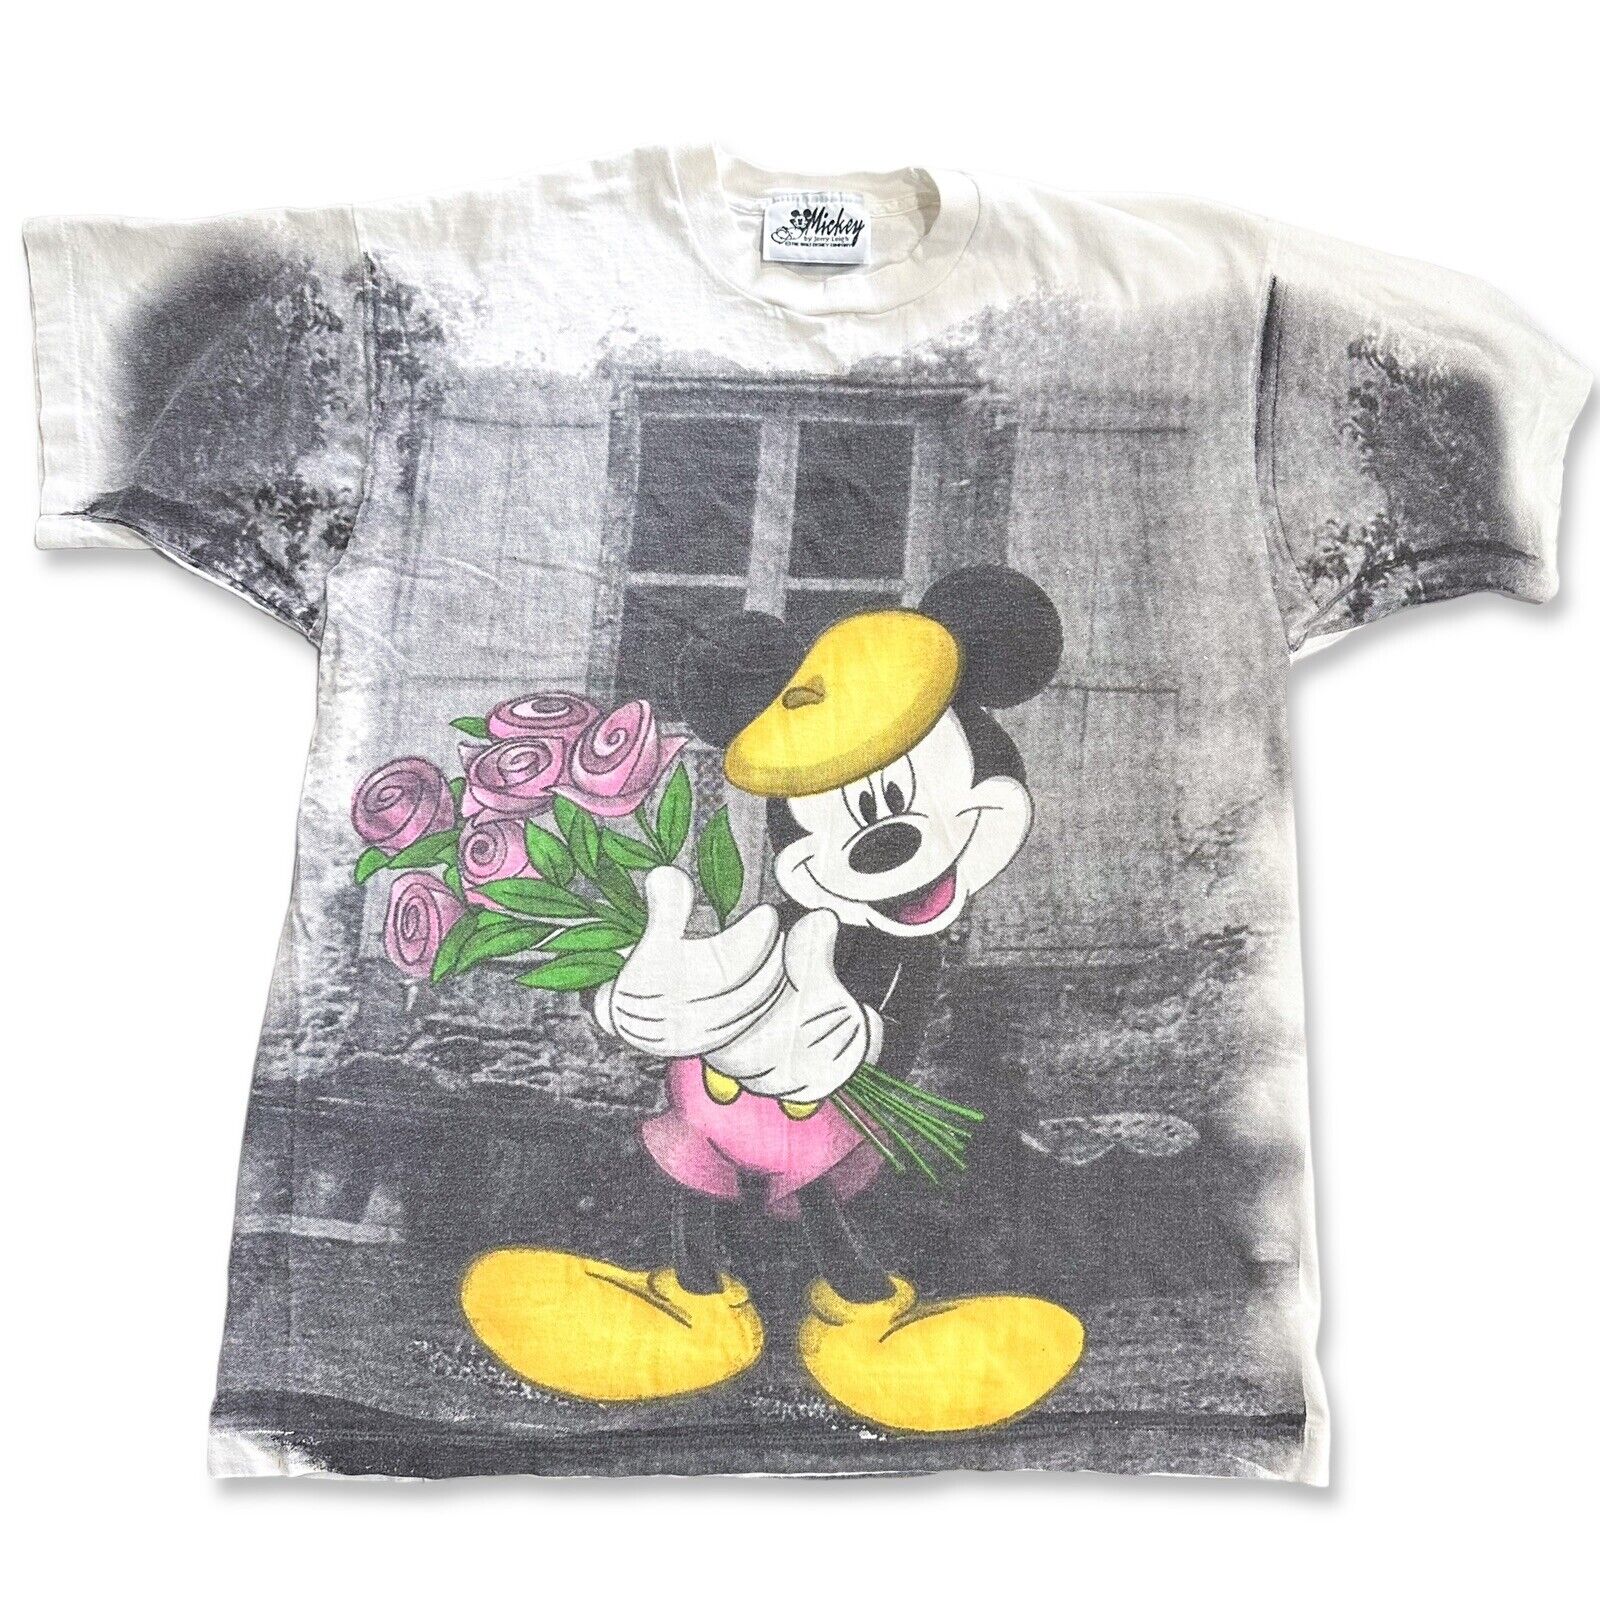 Mickey Unlimited Jerry Leigh T-Shirt XL ROSES Single Stitch AOP Disney 90s VTG